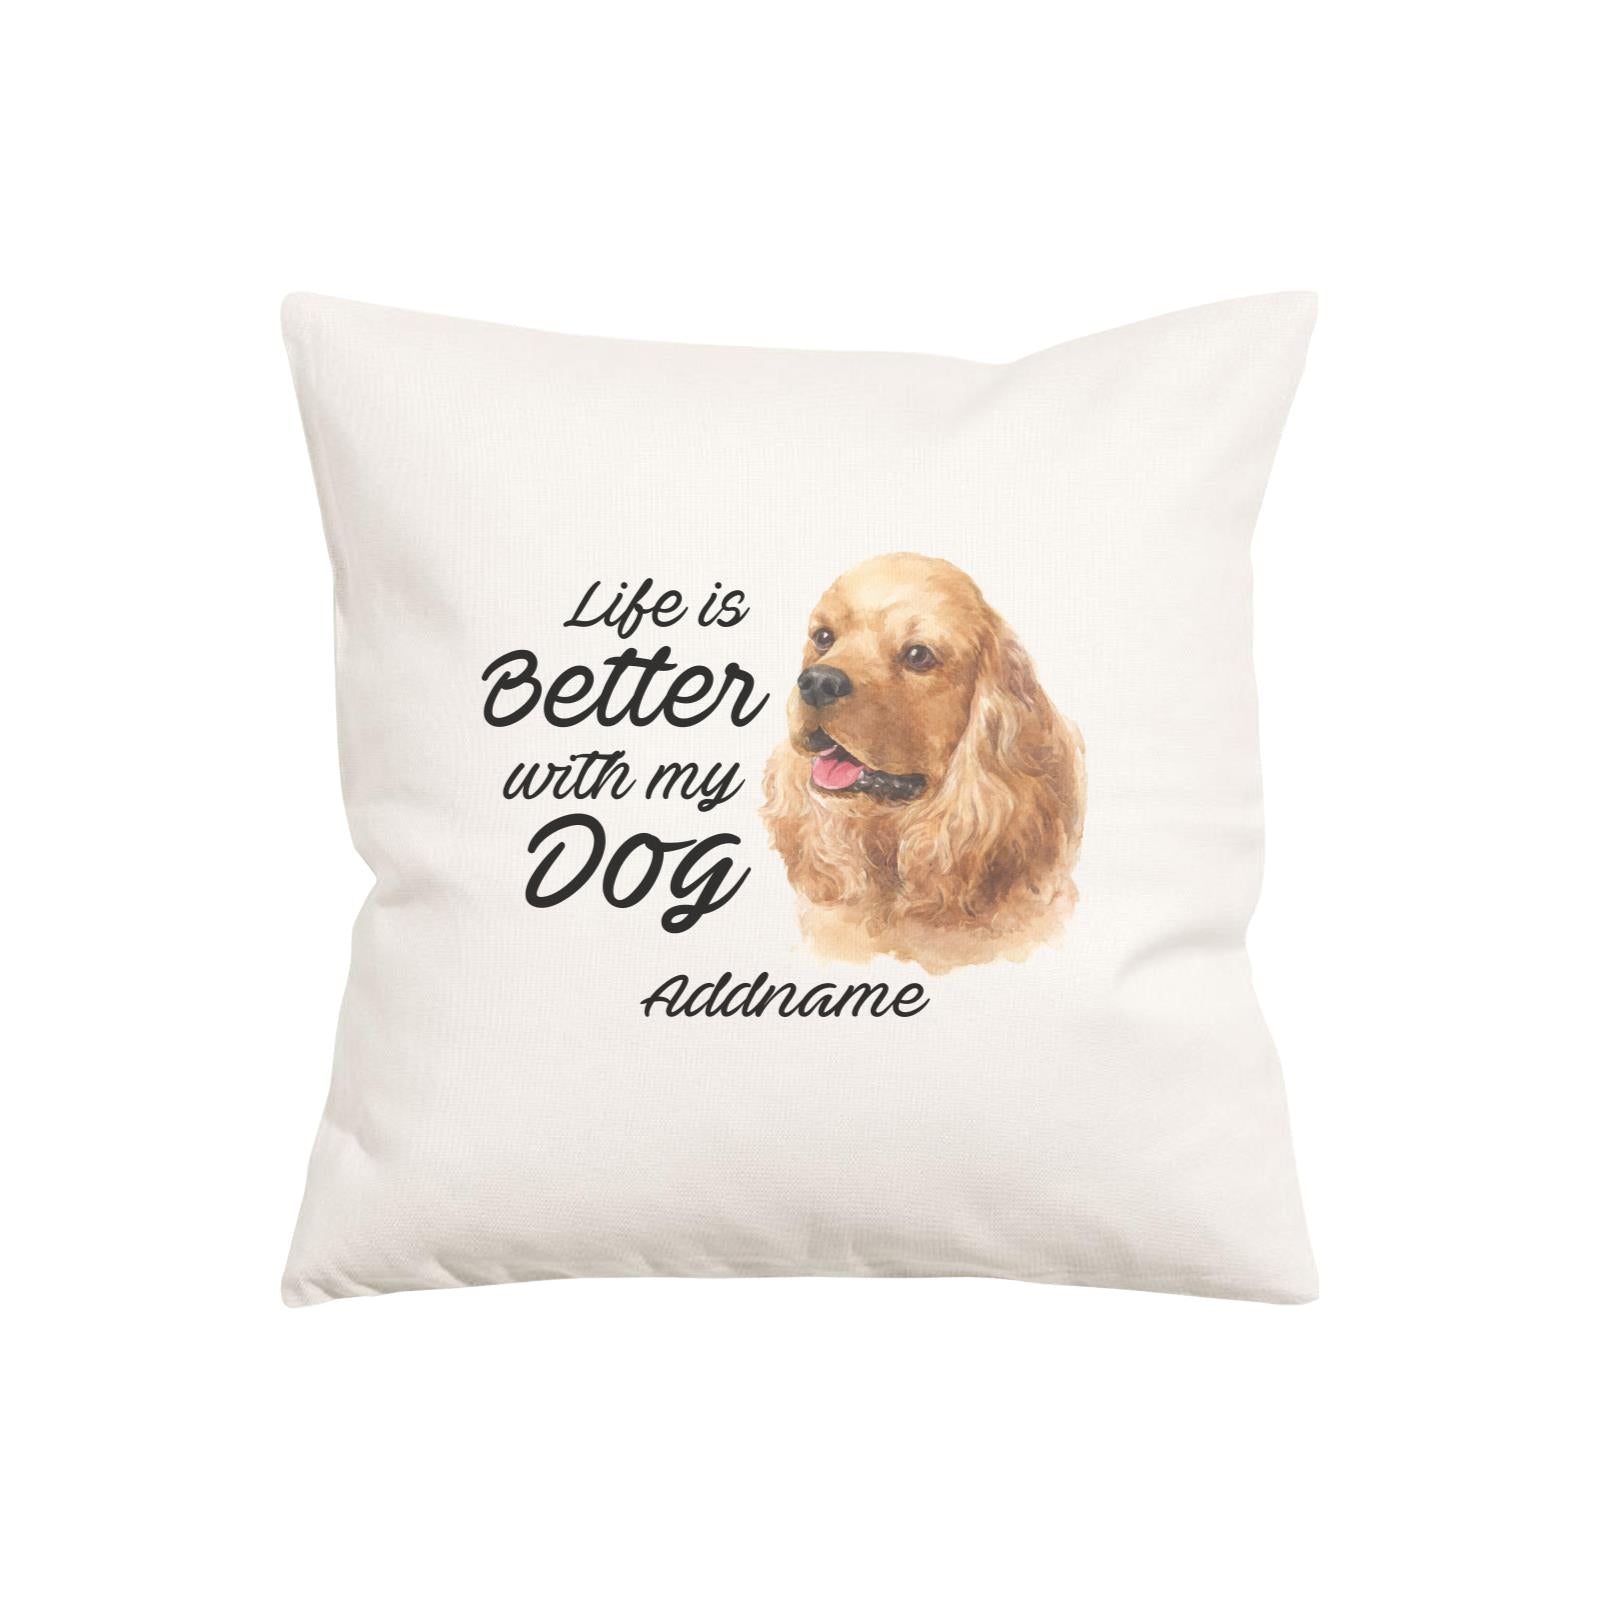 Watercolor Life is Better With My Dog Cocker Spaniel Addname Pillow Cushion